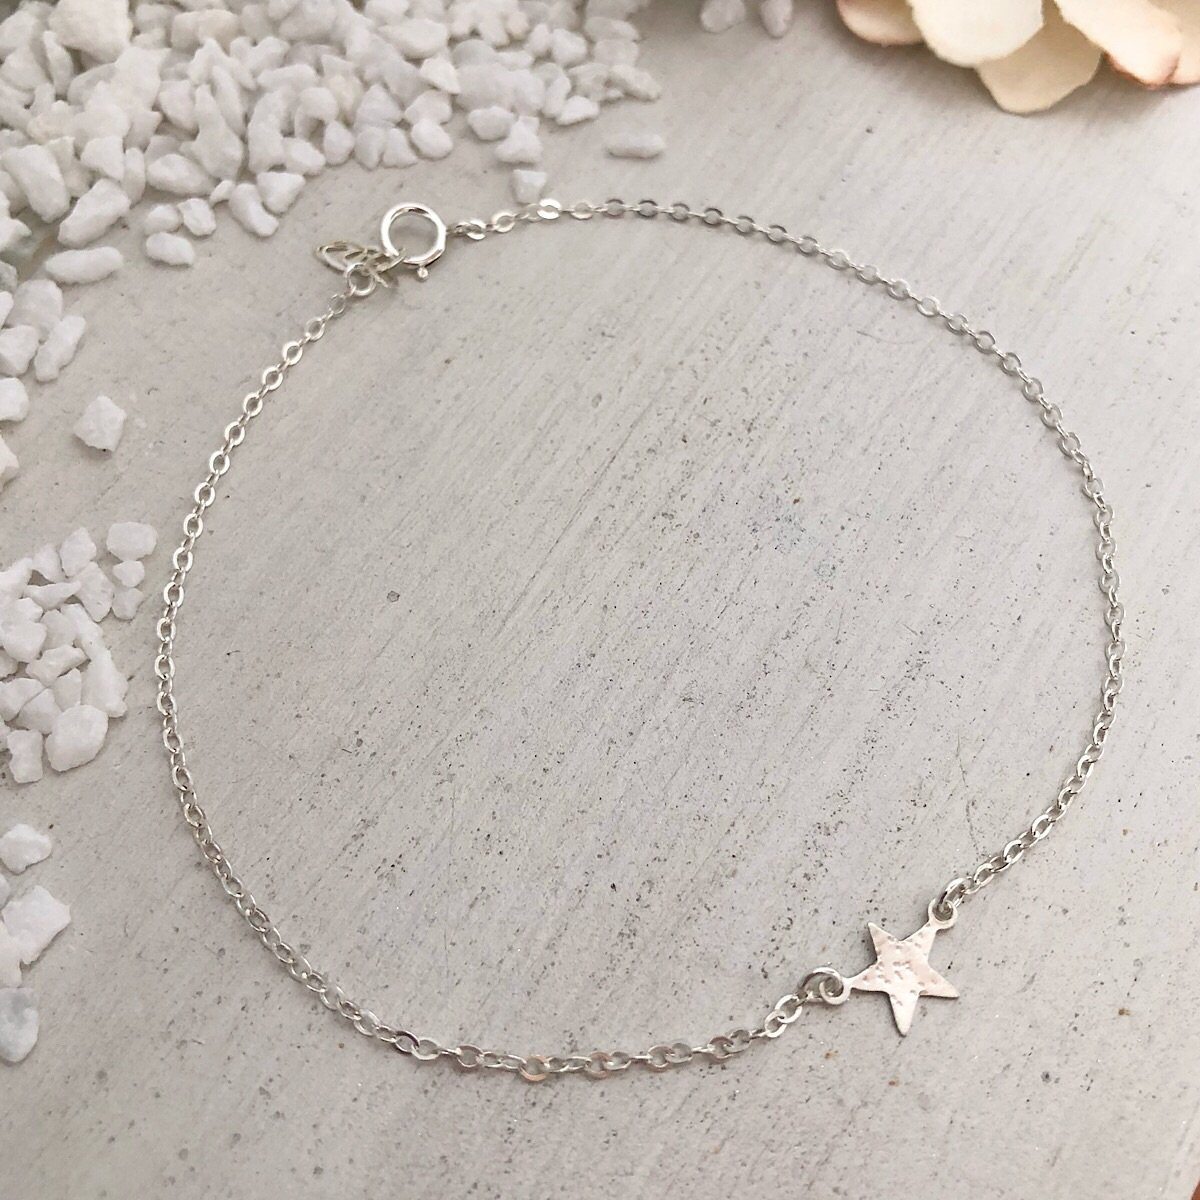 Lucky Star Anklet - IsabelleGraceJewelry